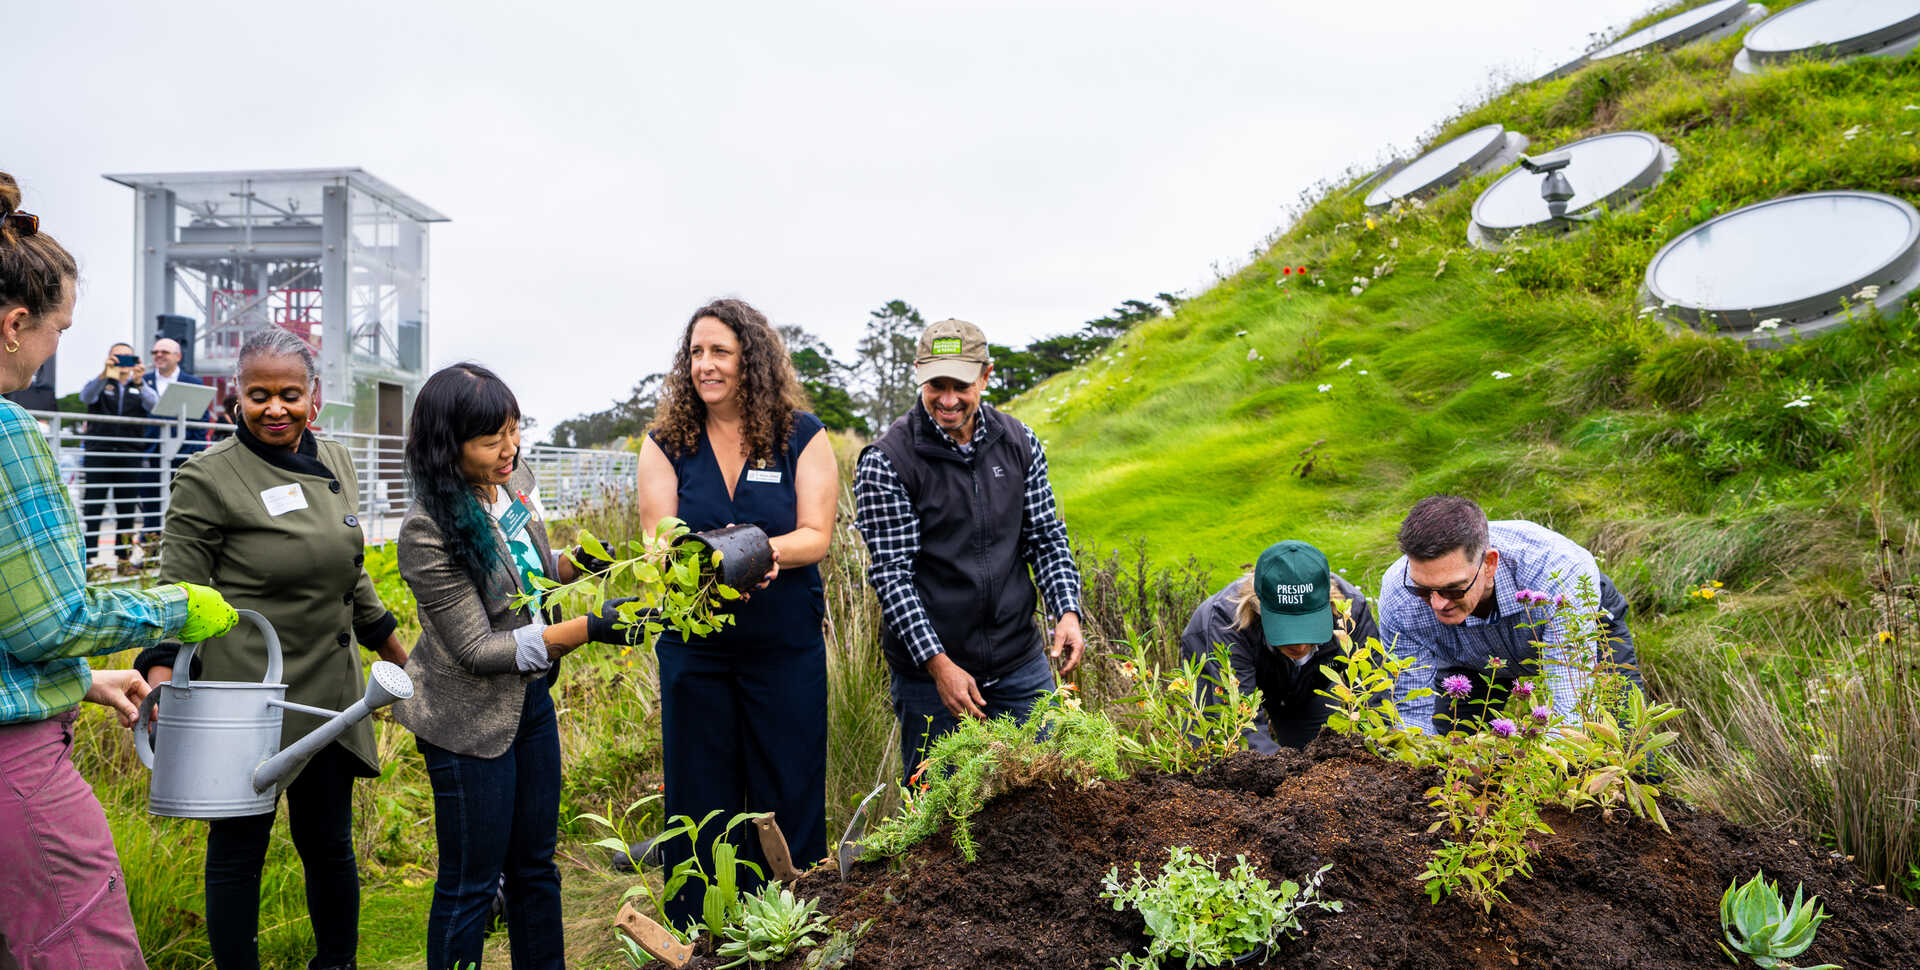 Planting native plants on Academys Living Roof during Reimagining SF launch event. Photo by Nicole Ravicchio